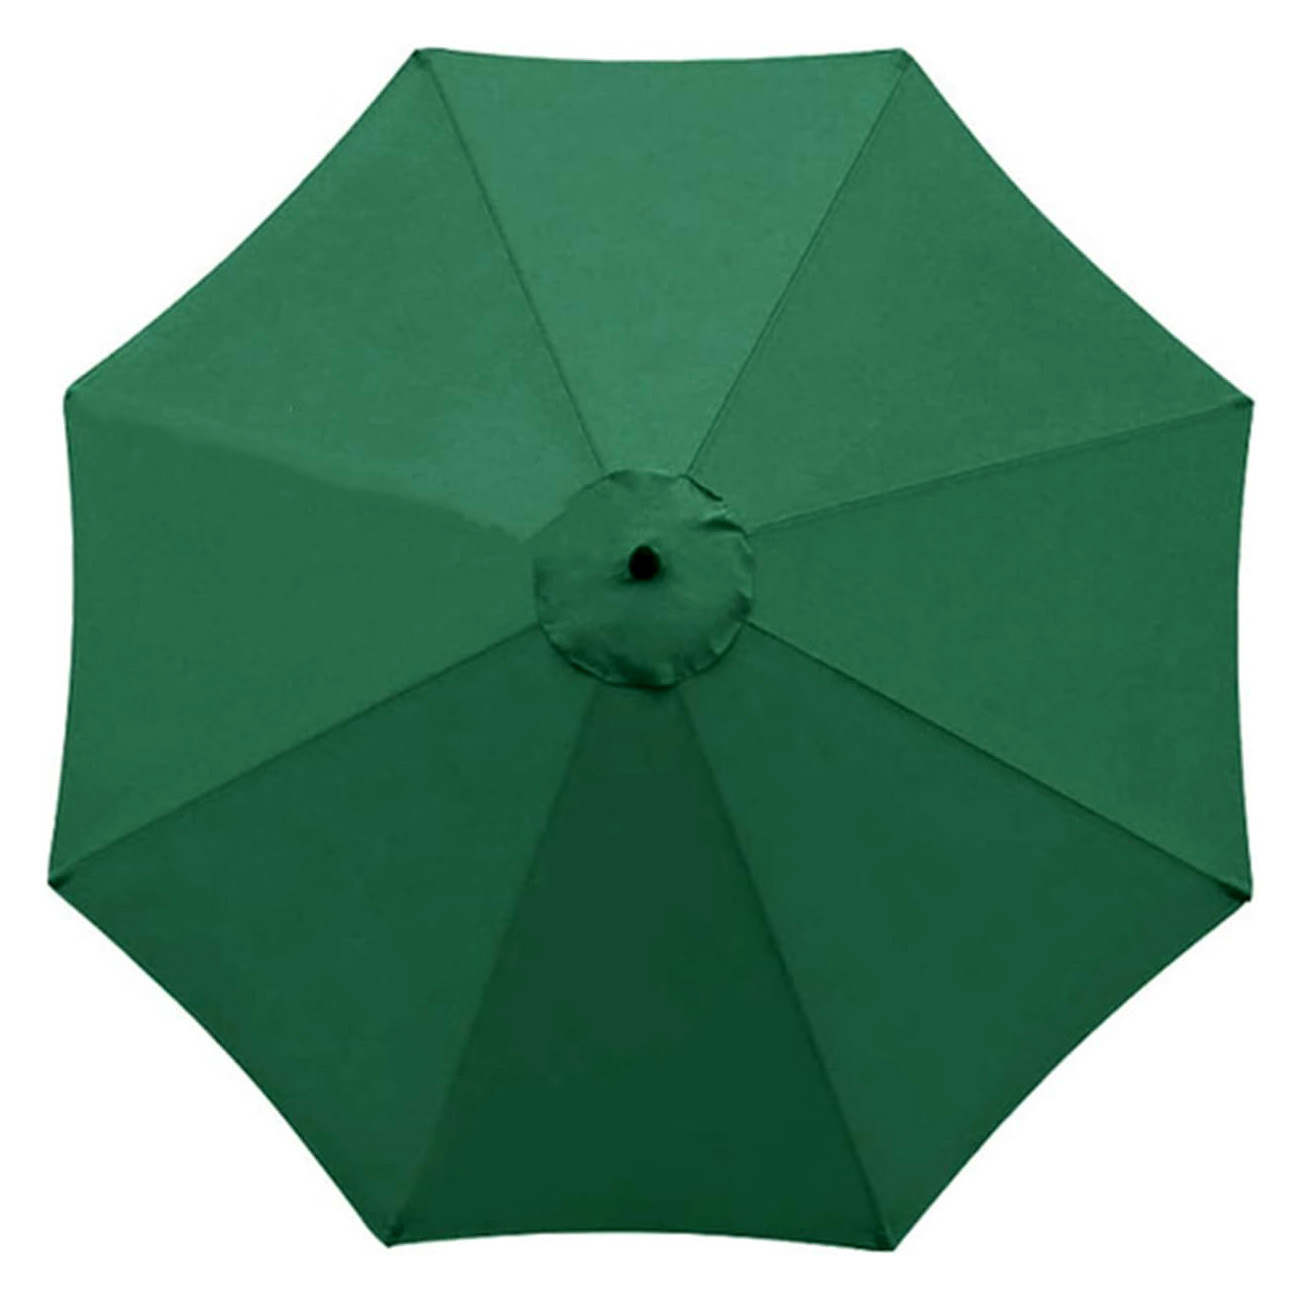 3m Patio Umbrella Replacement Cover 10ft 8 Ribs Large Outdoor Canopy (Green)